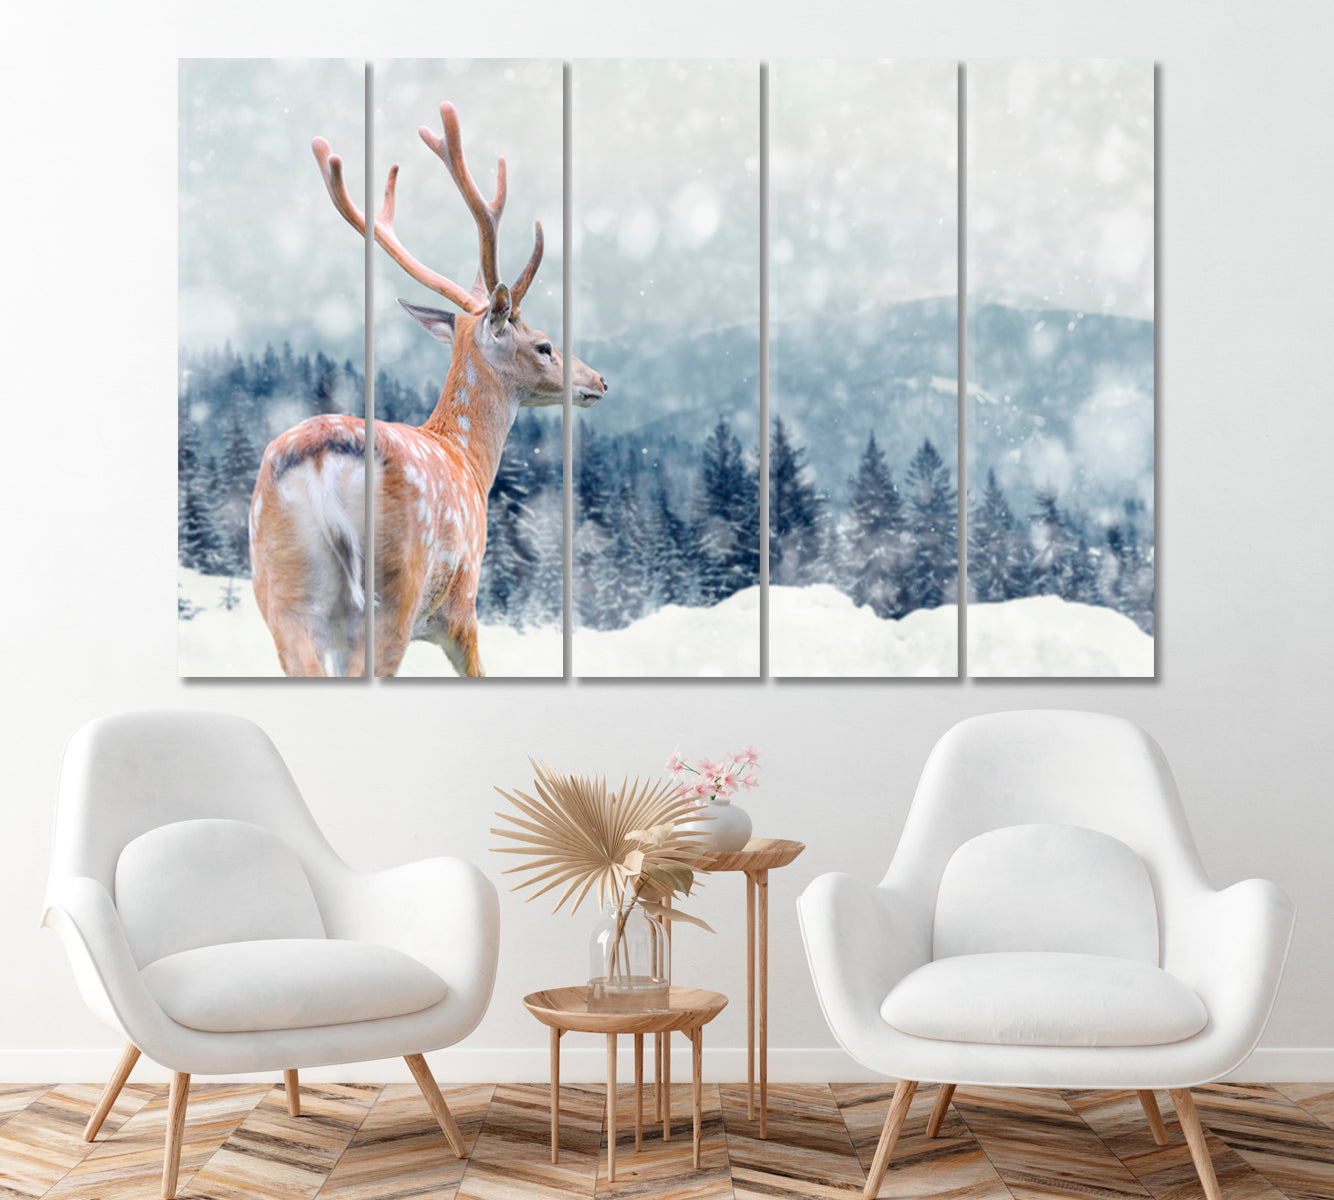 Deer in Winter Forest Canvas Print ArtLexy 5 Panels 36"x24" inches 